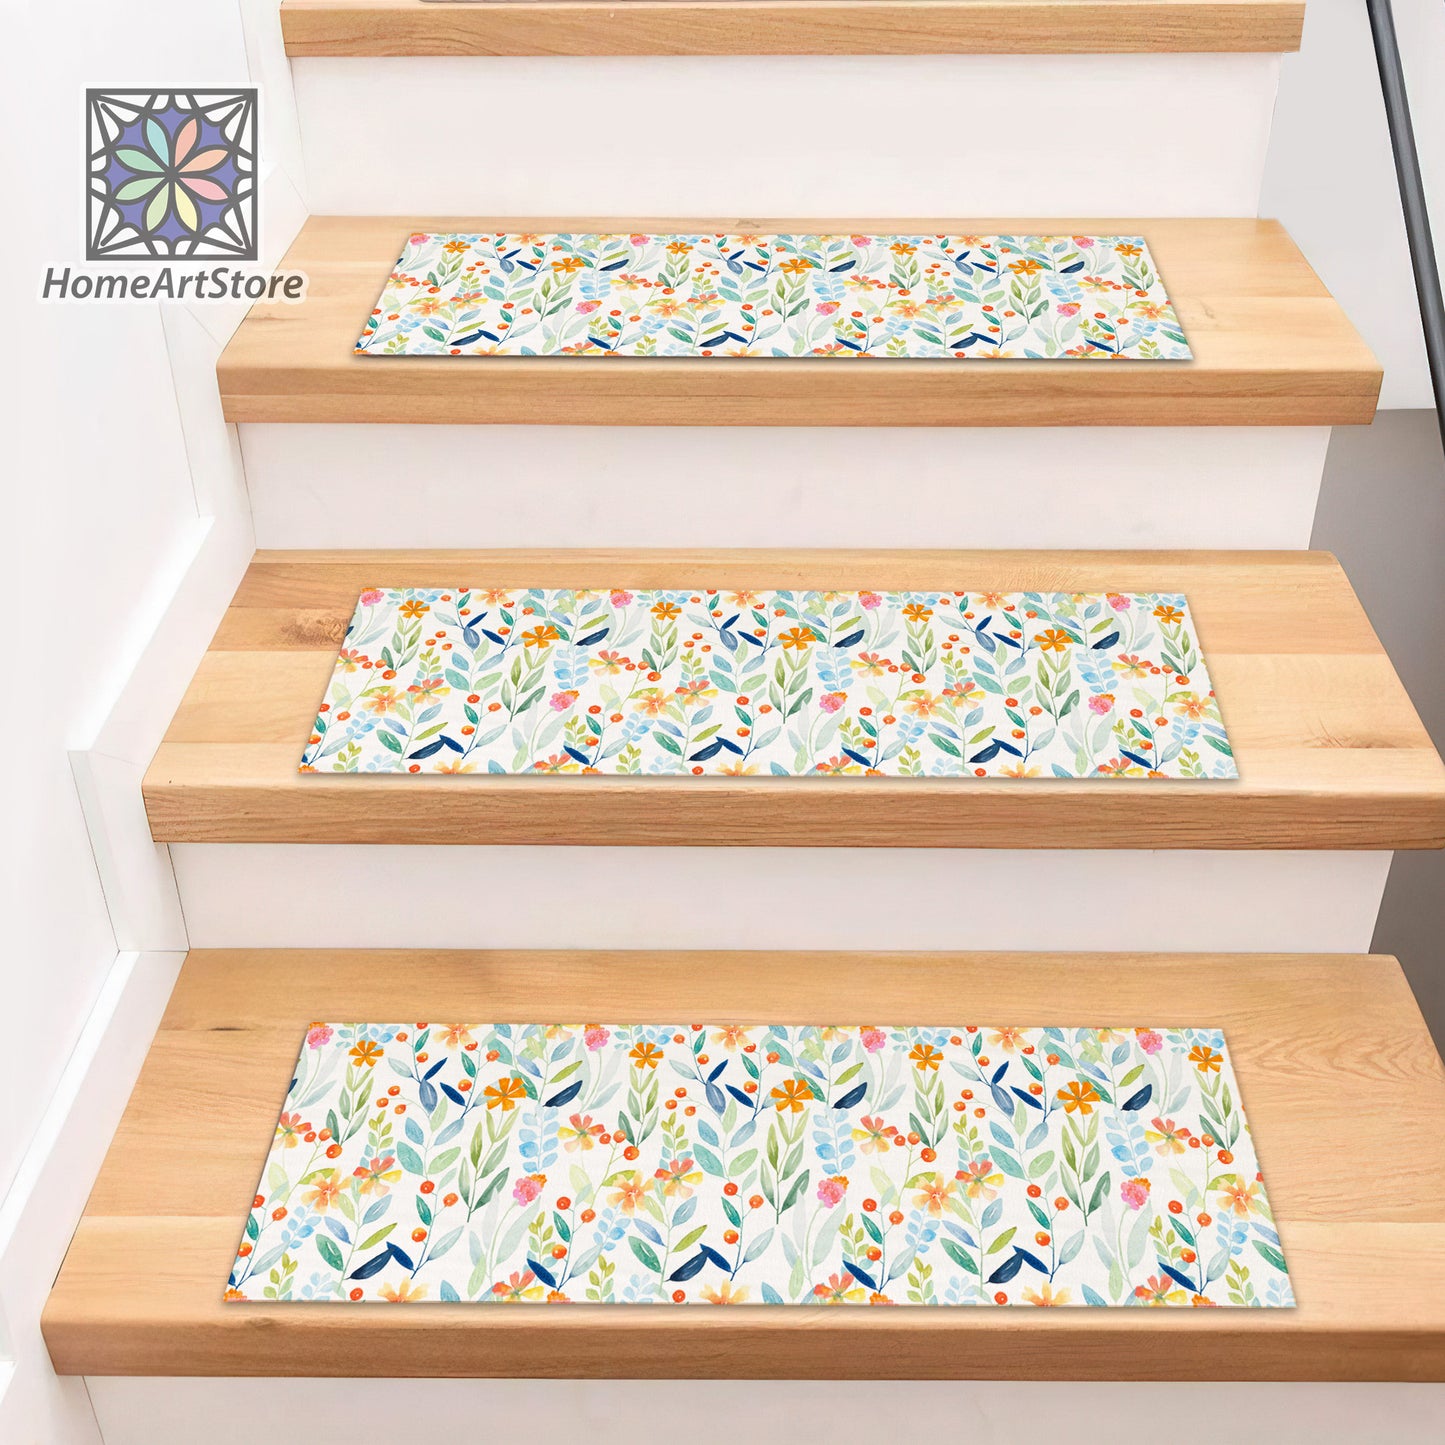 Pastel Color Stair Rugs, Bohemian Themed Stair Treads Carpet, Colorful Flowers Pattern Stair Mats, Machine Washable Step Rug